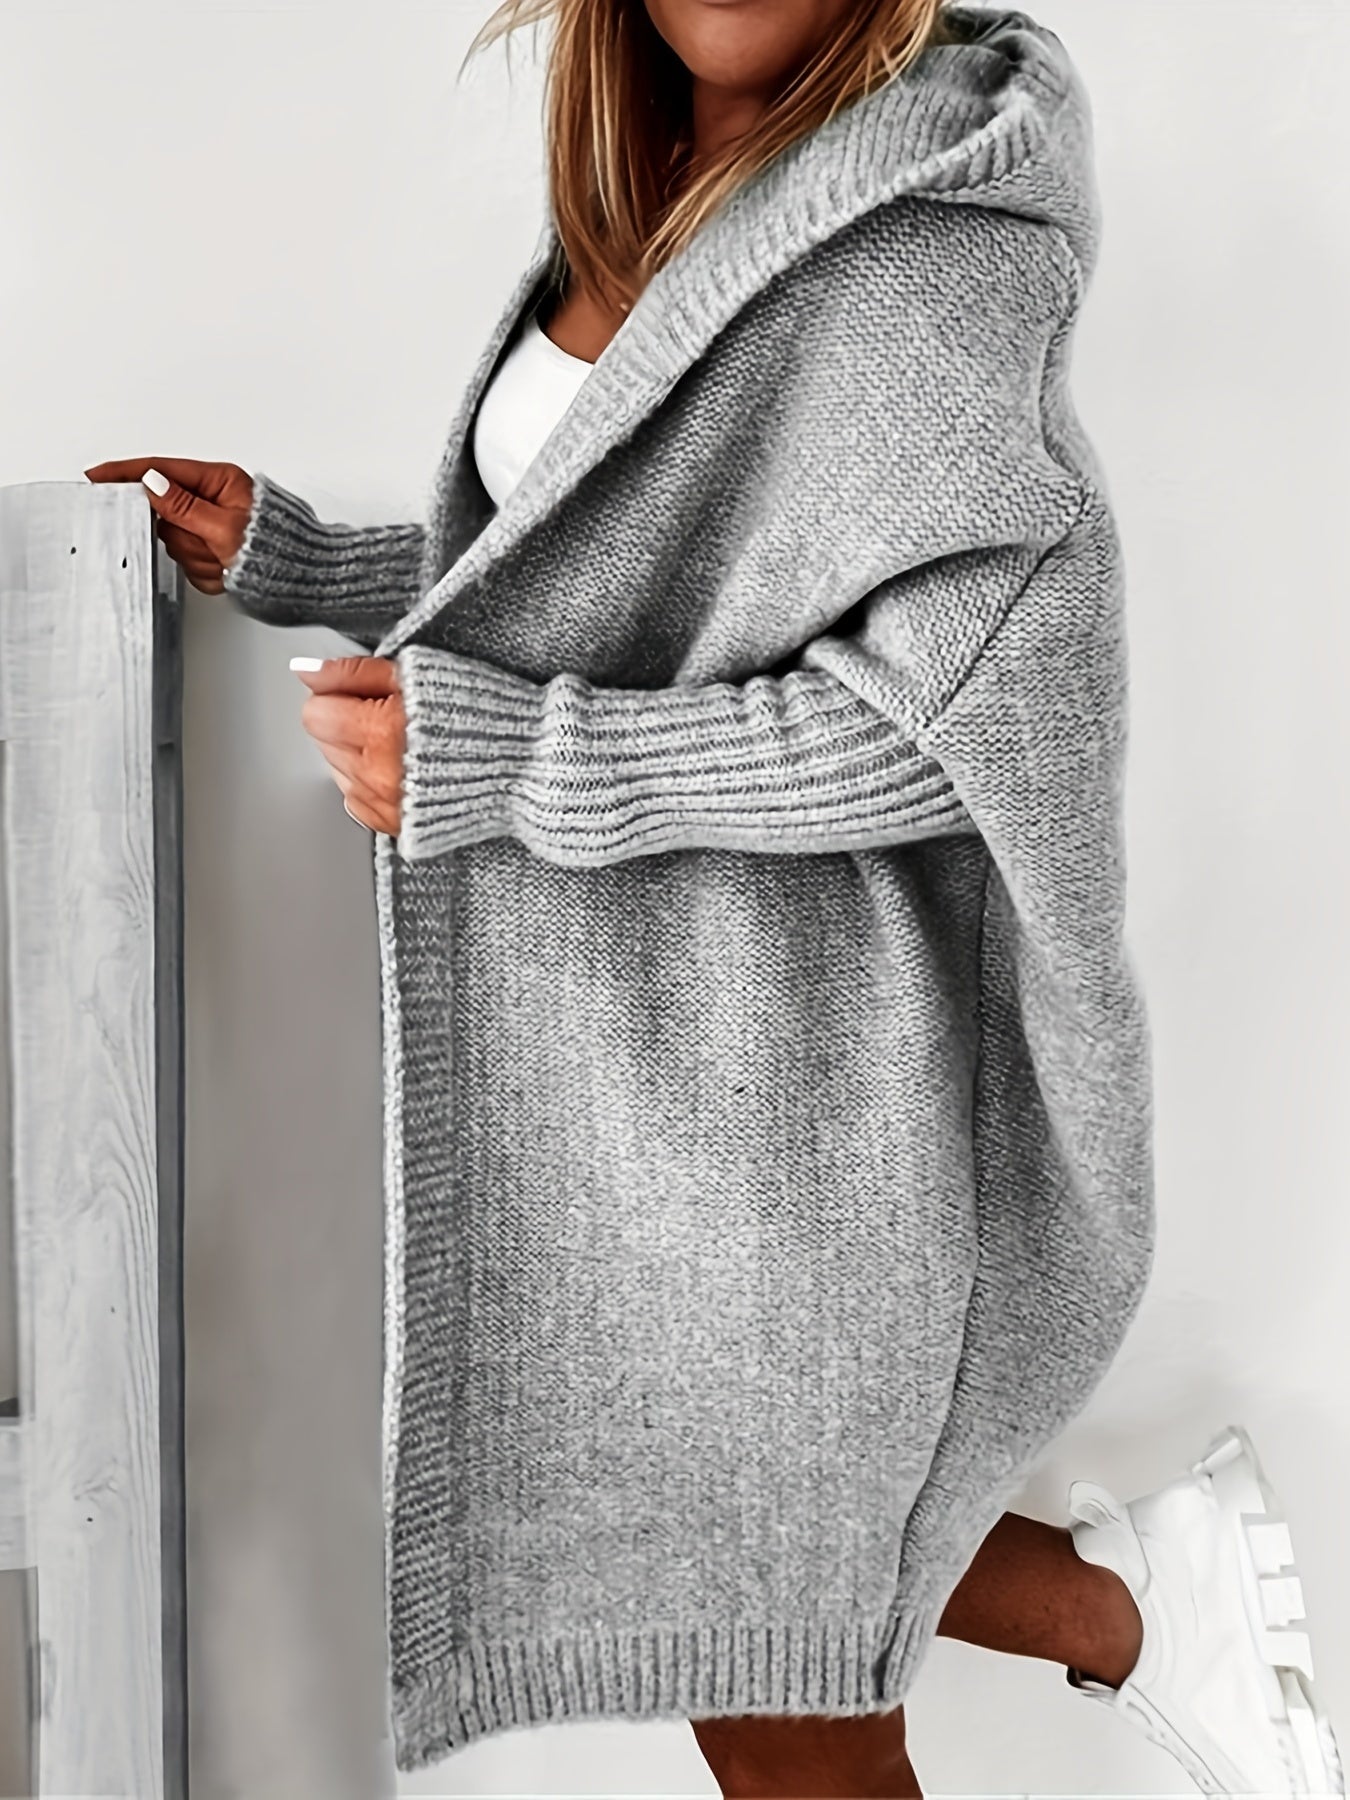 Oversized Hooded Knitted Cardigan, Long Sleeve Casual Sweater For Winter & Fall, Women's Clothing